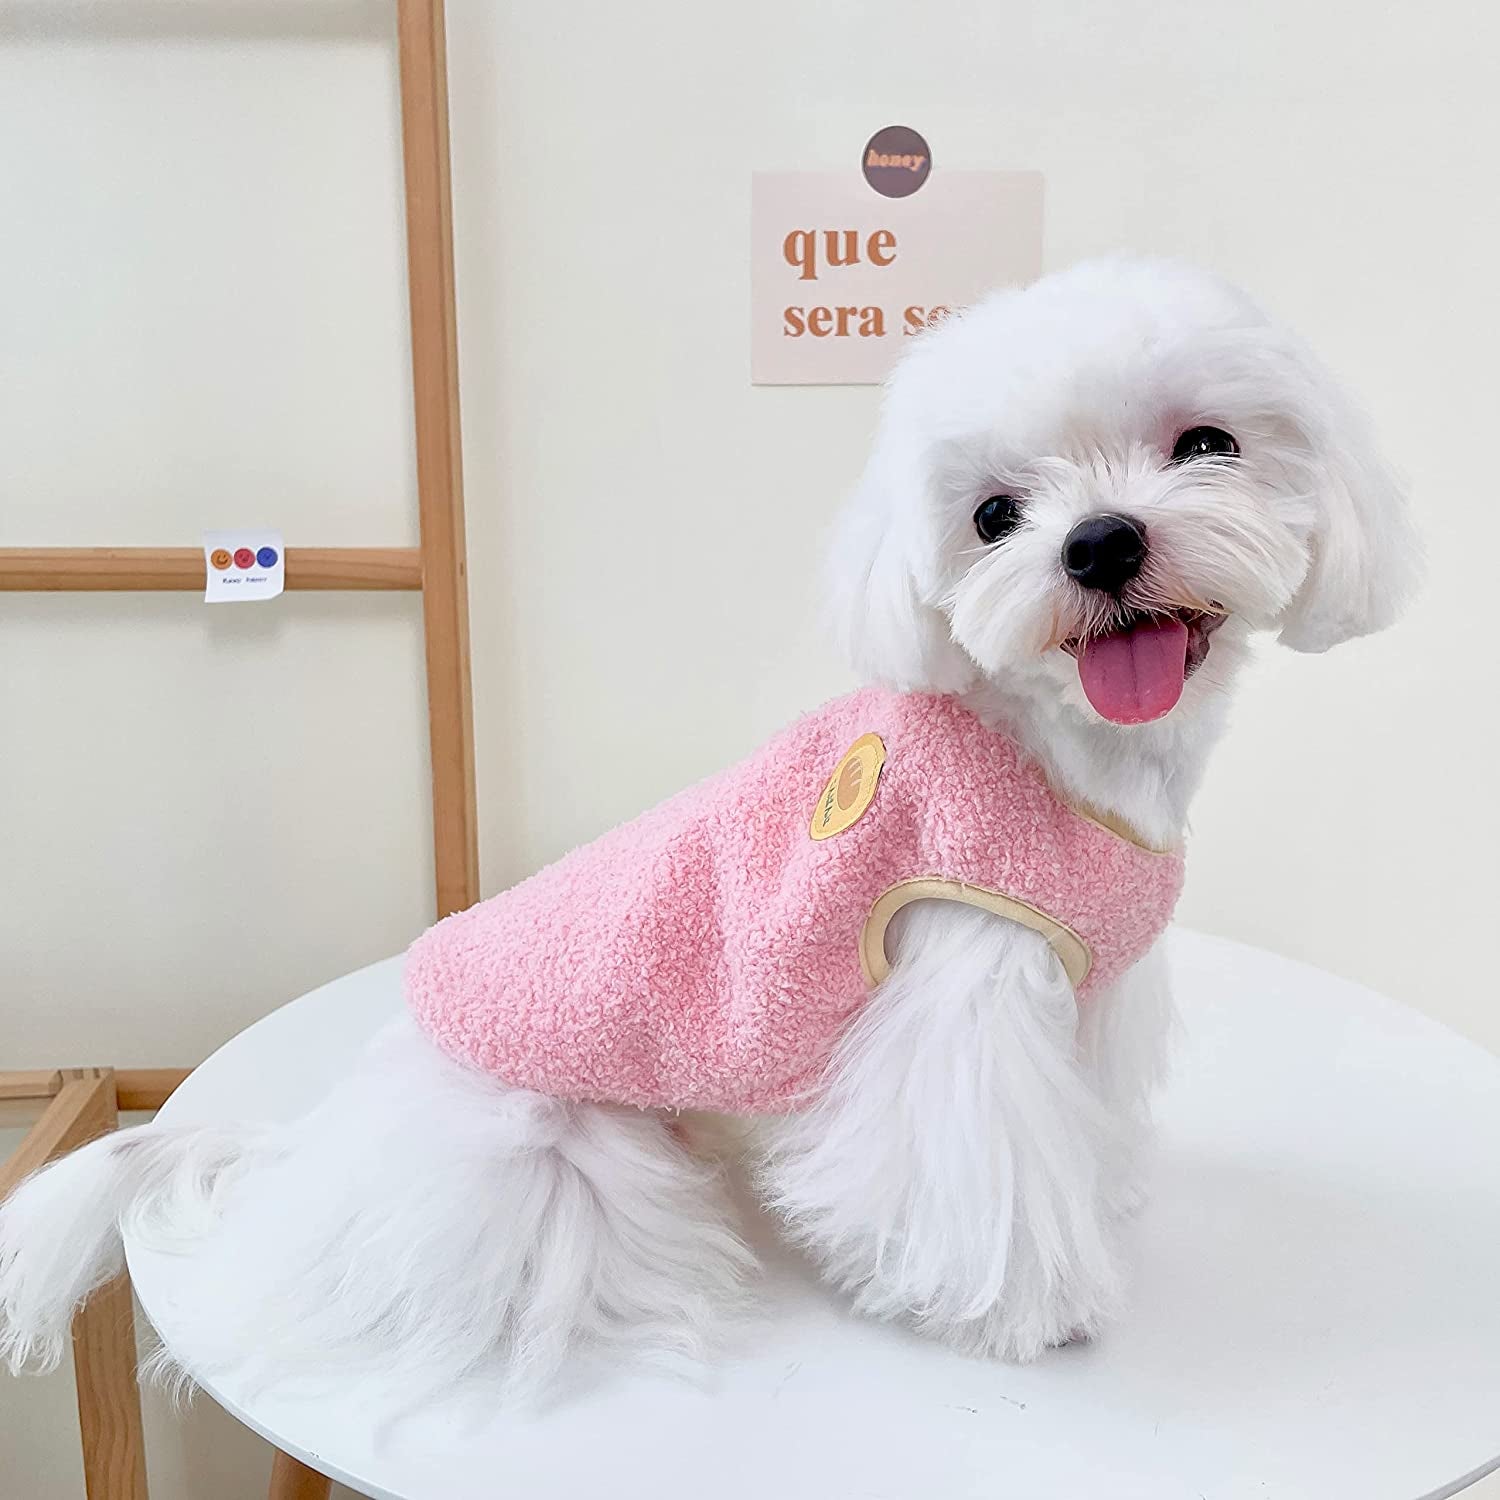 Loyanyy Fleece Lined Dog Vest for Winter Warm Soft Sweater for Small Medium Dog Cat Cute Puppy Kitten Clothes a Pink Small